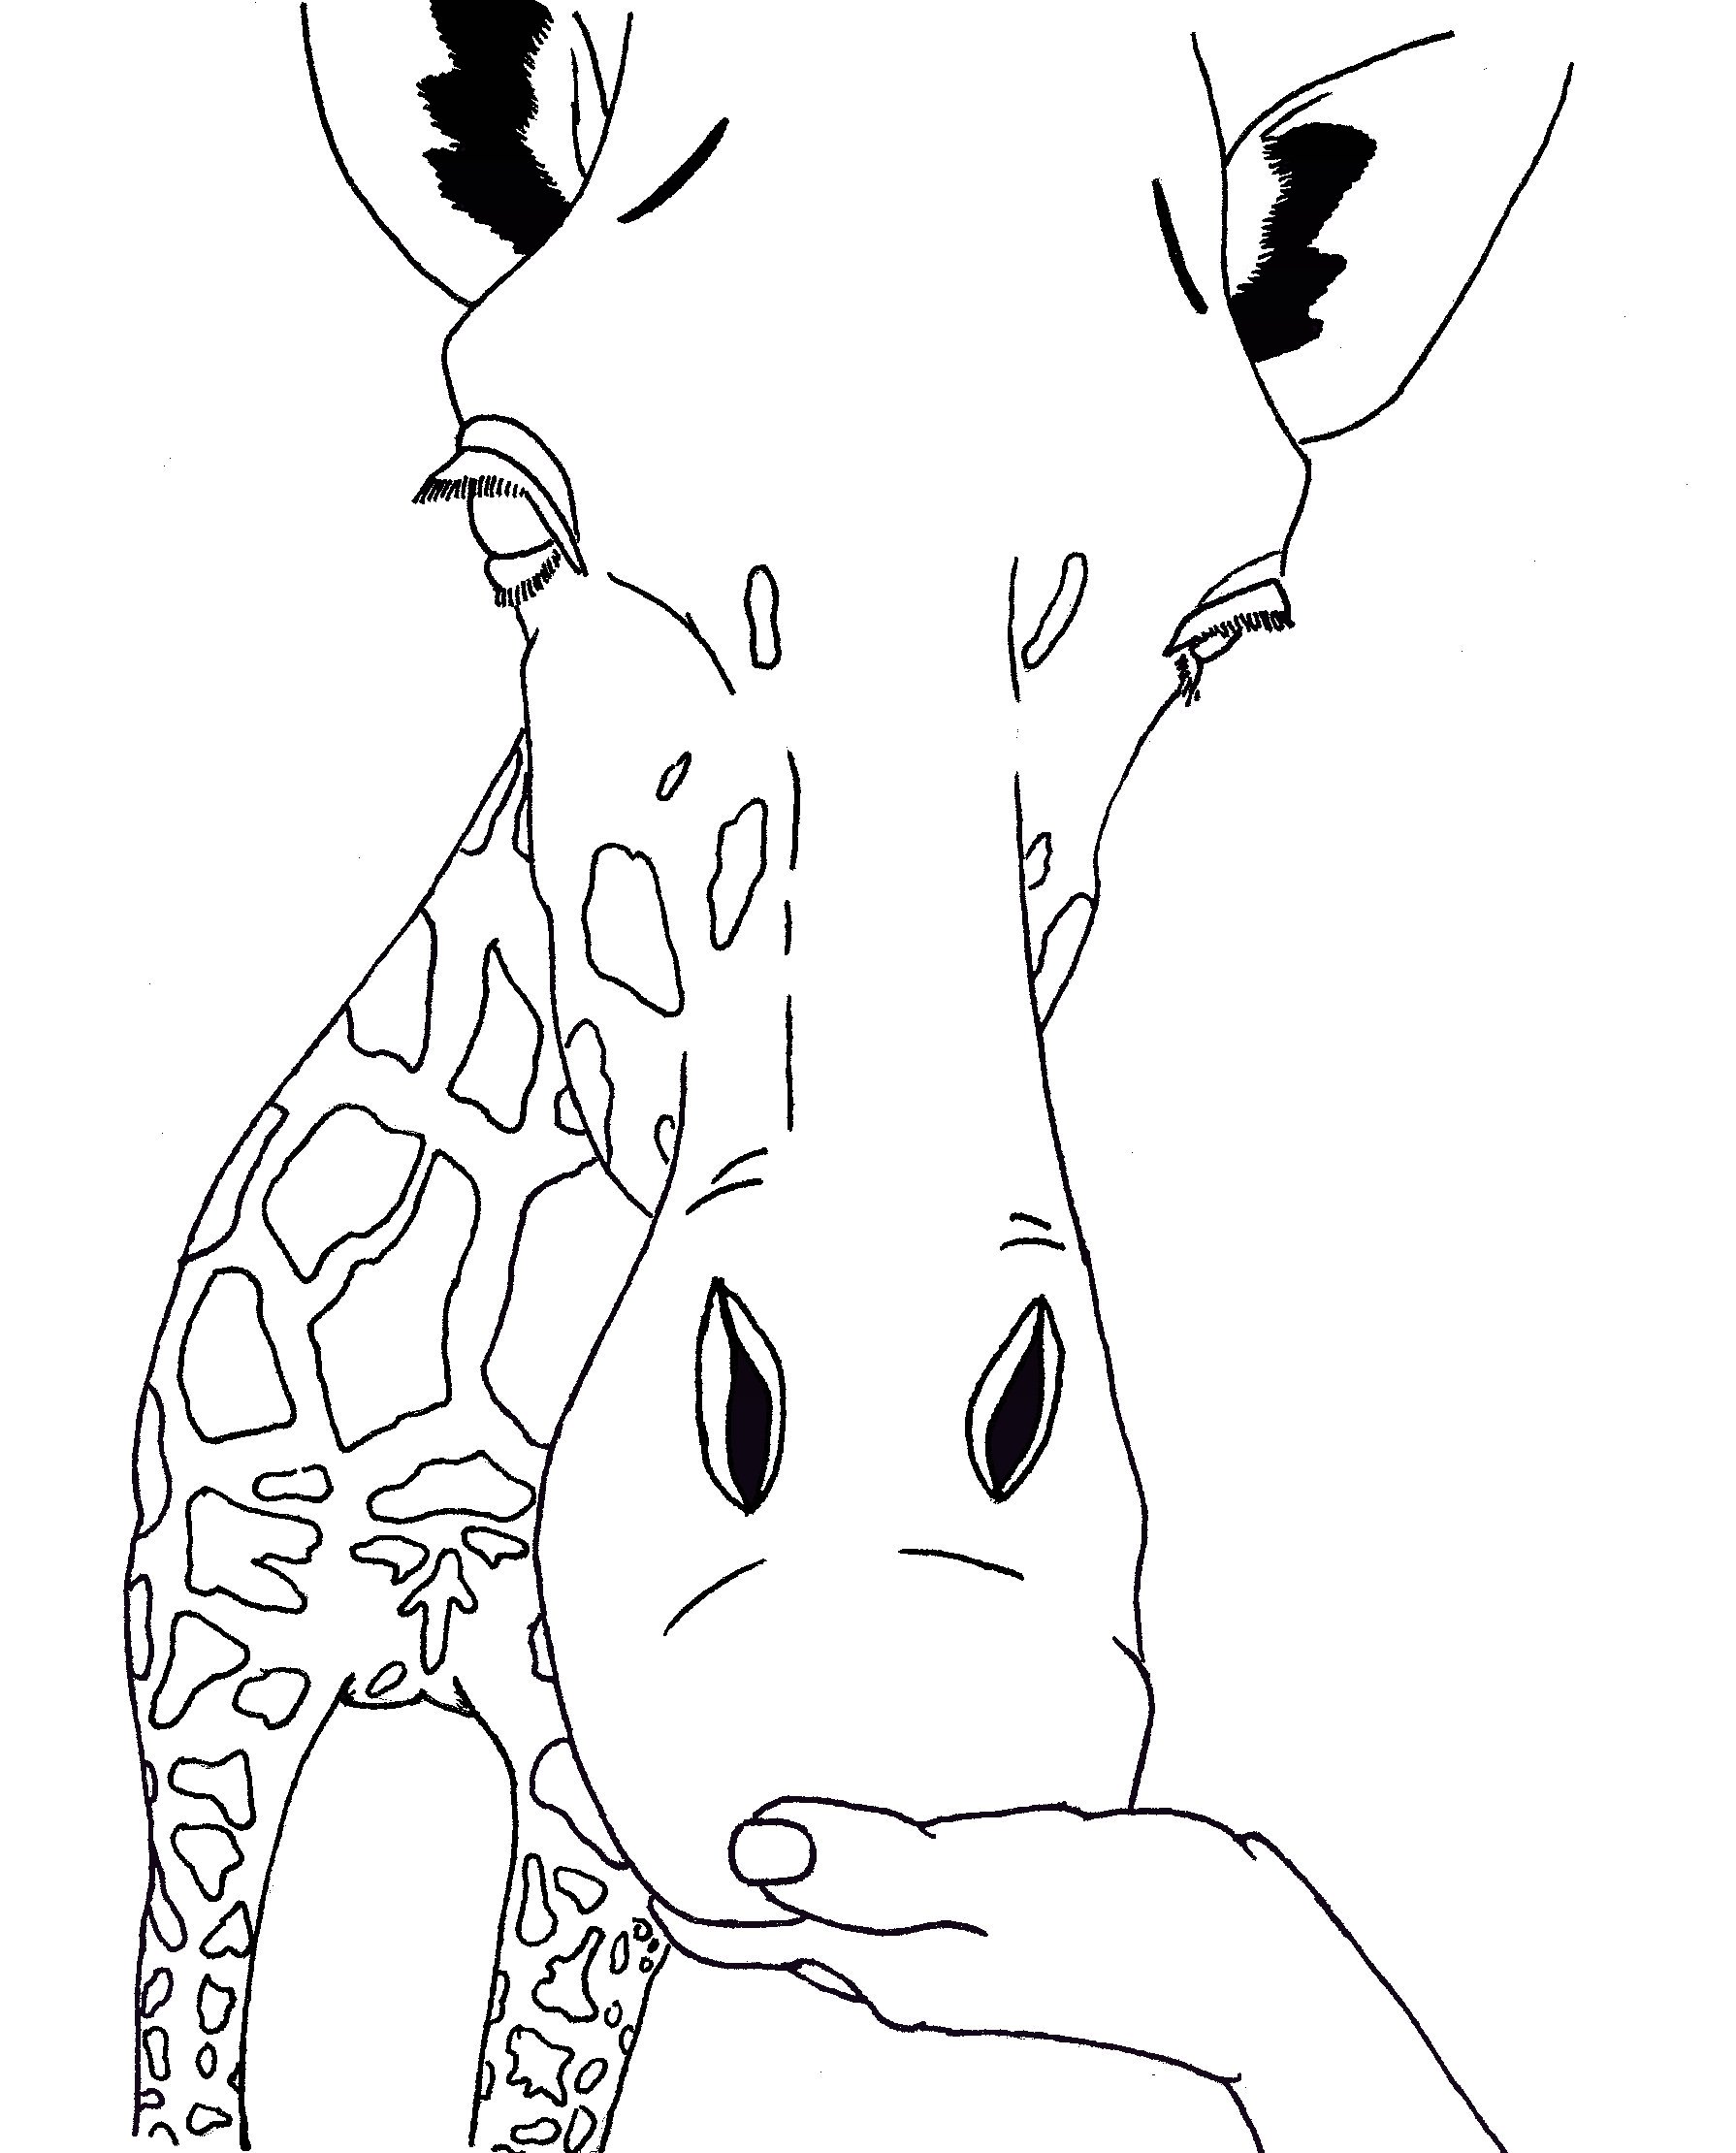 Coloring-Page-of-Giraffe-Face.jpg